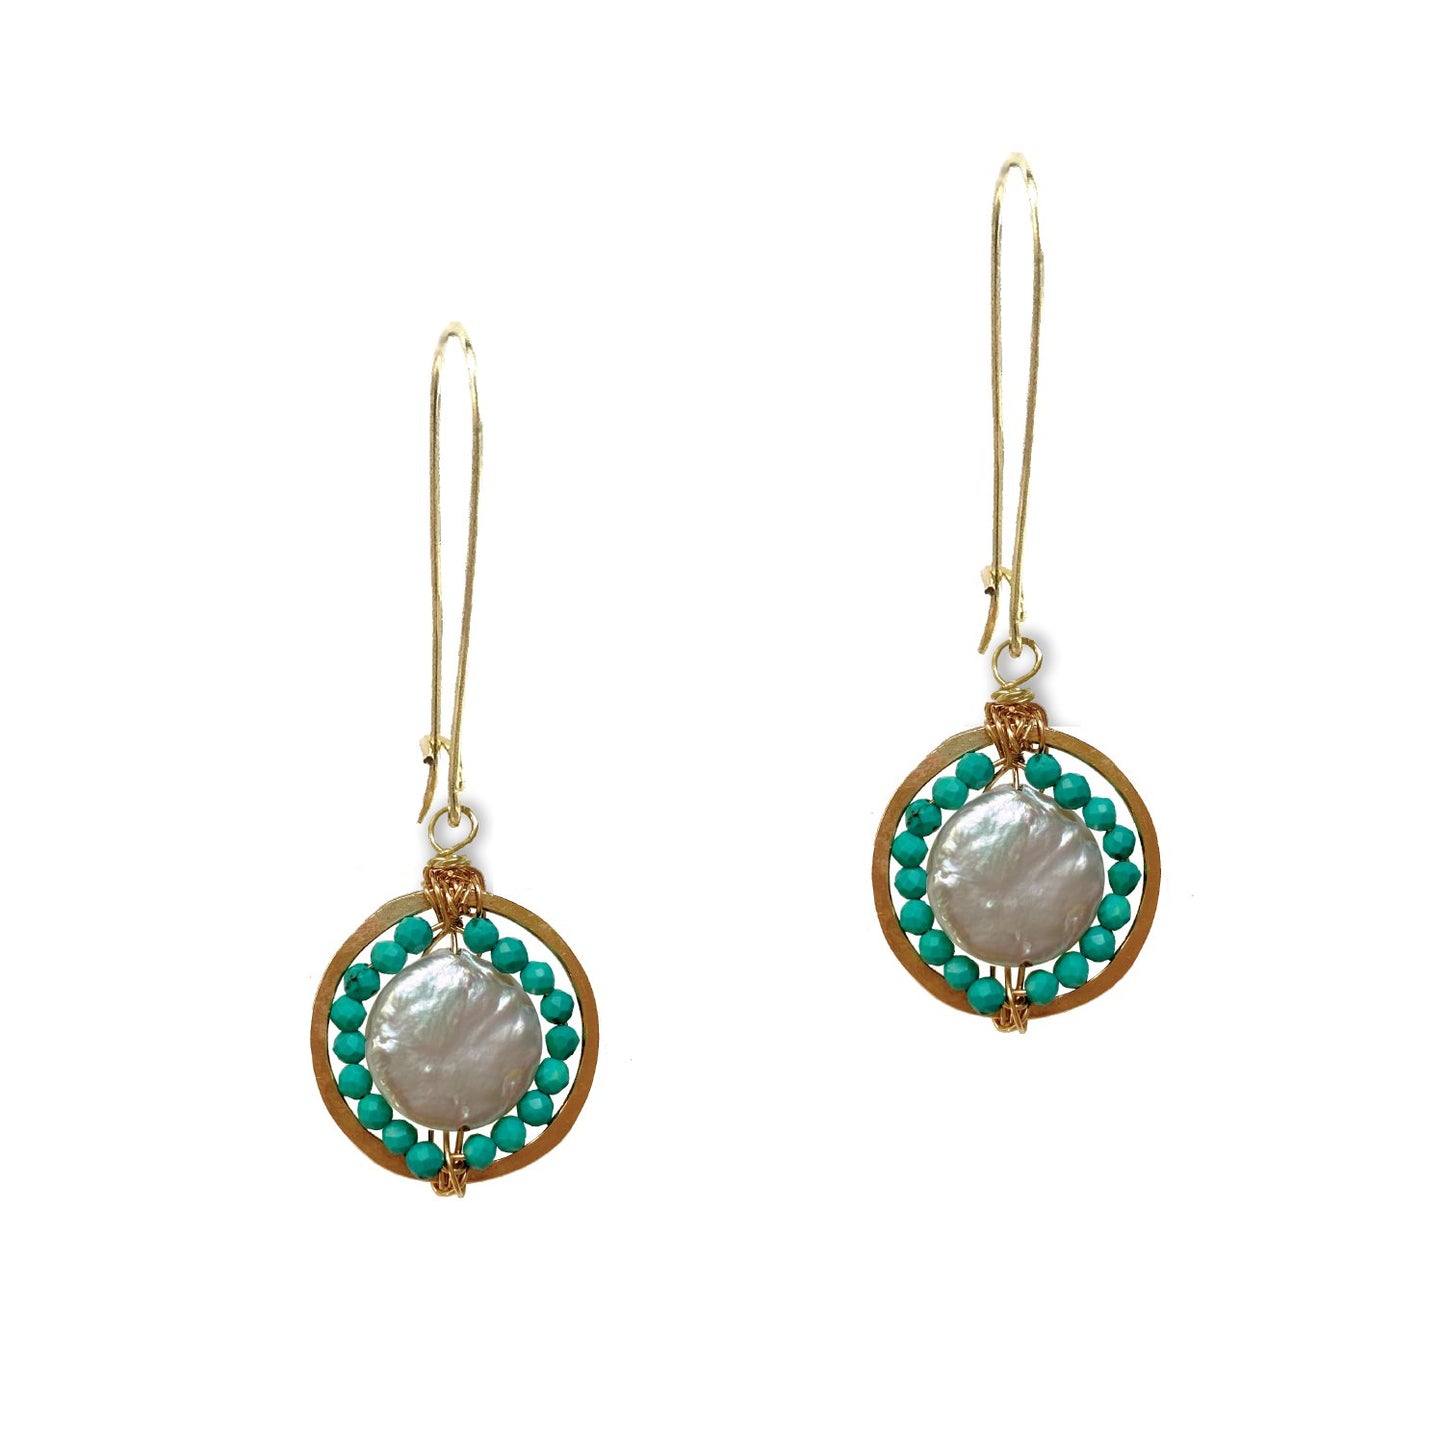 Gemstone Medallion Earrings - Turquoise Robyn Canady 